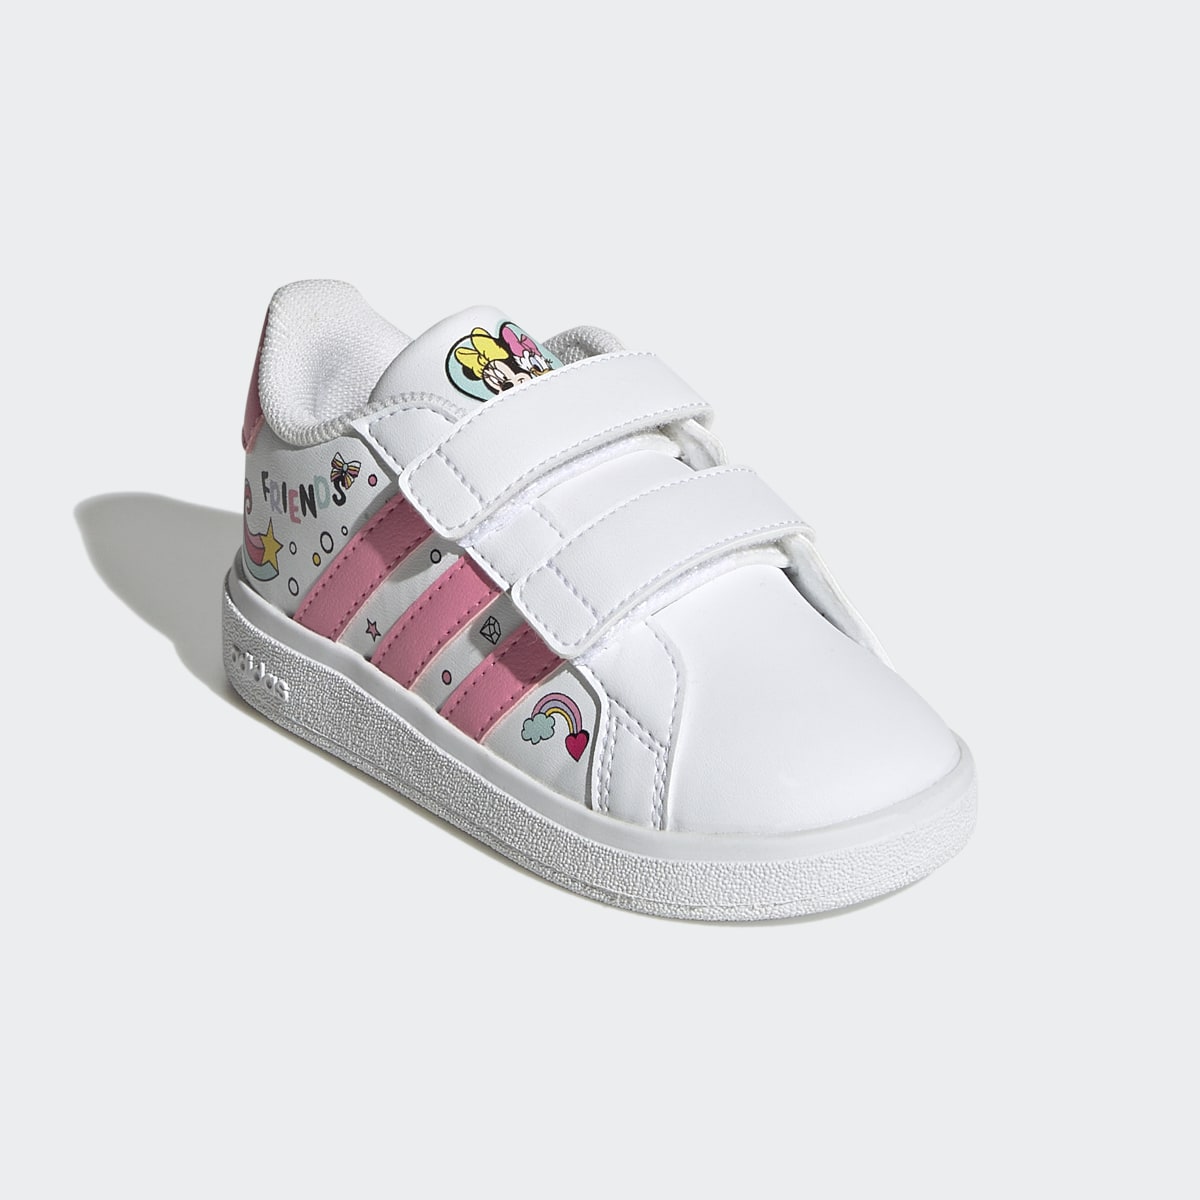 Adidas Minnie Mouse Grand Court Elastic Laces and Top Strap Shoes. 5